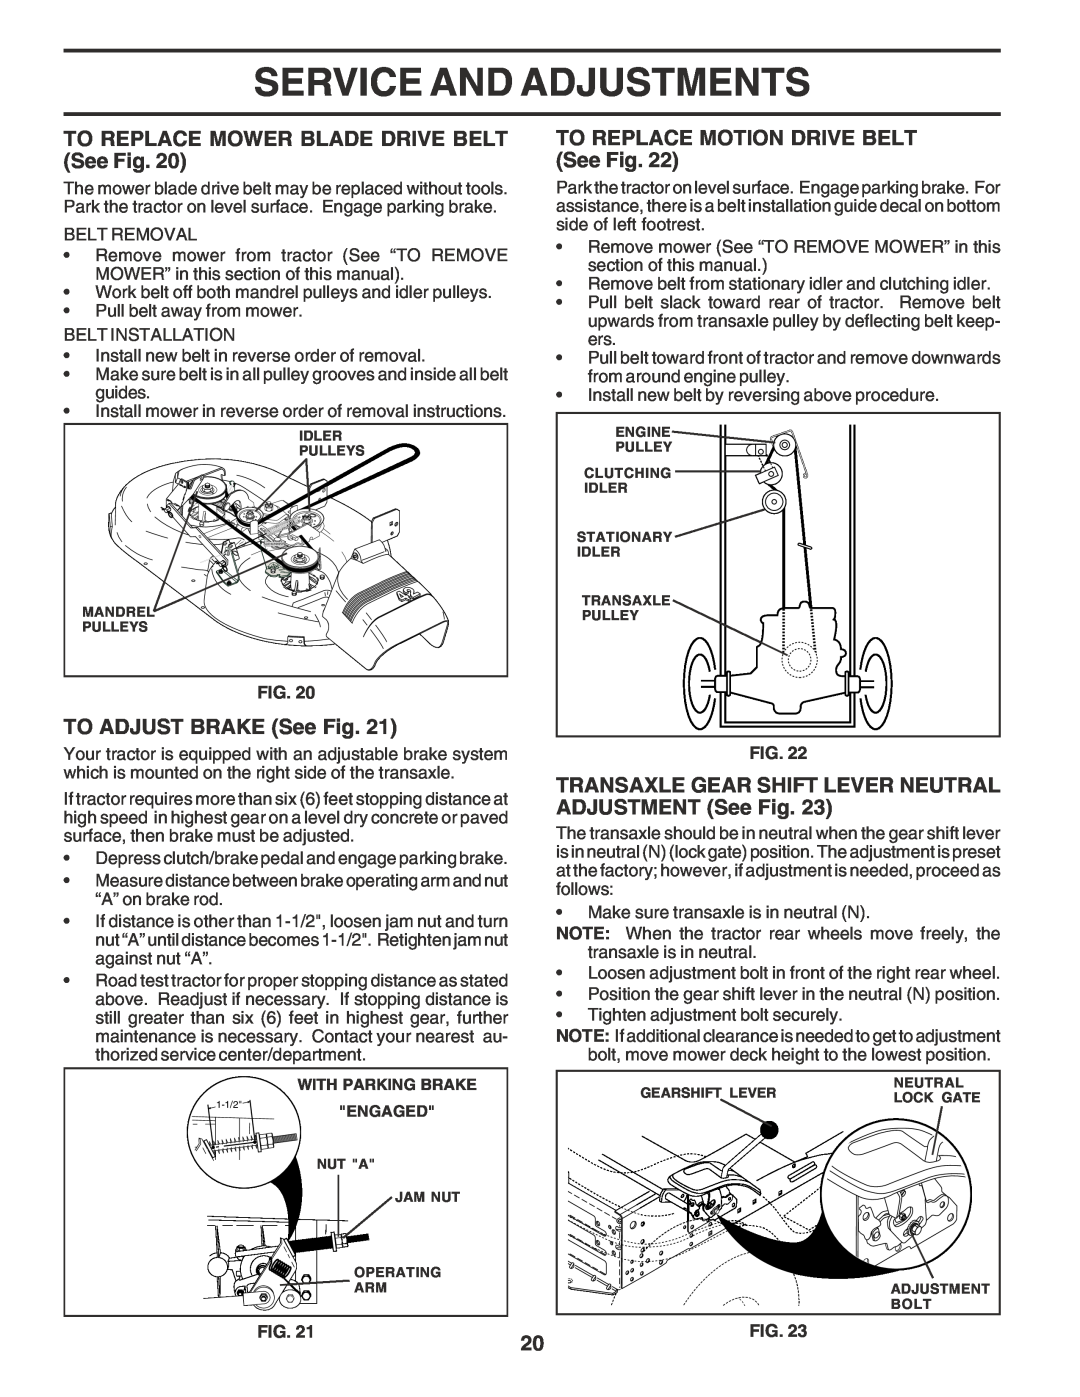 Poulan 180196 TO REPLACE MOWER BLADE DRIVE BELT See Fig, TO ADJUST BRAKE See Fig, TO REPLACE MOTION DRIVE BELT See Fig 